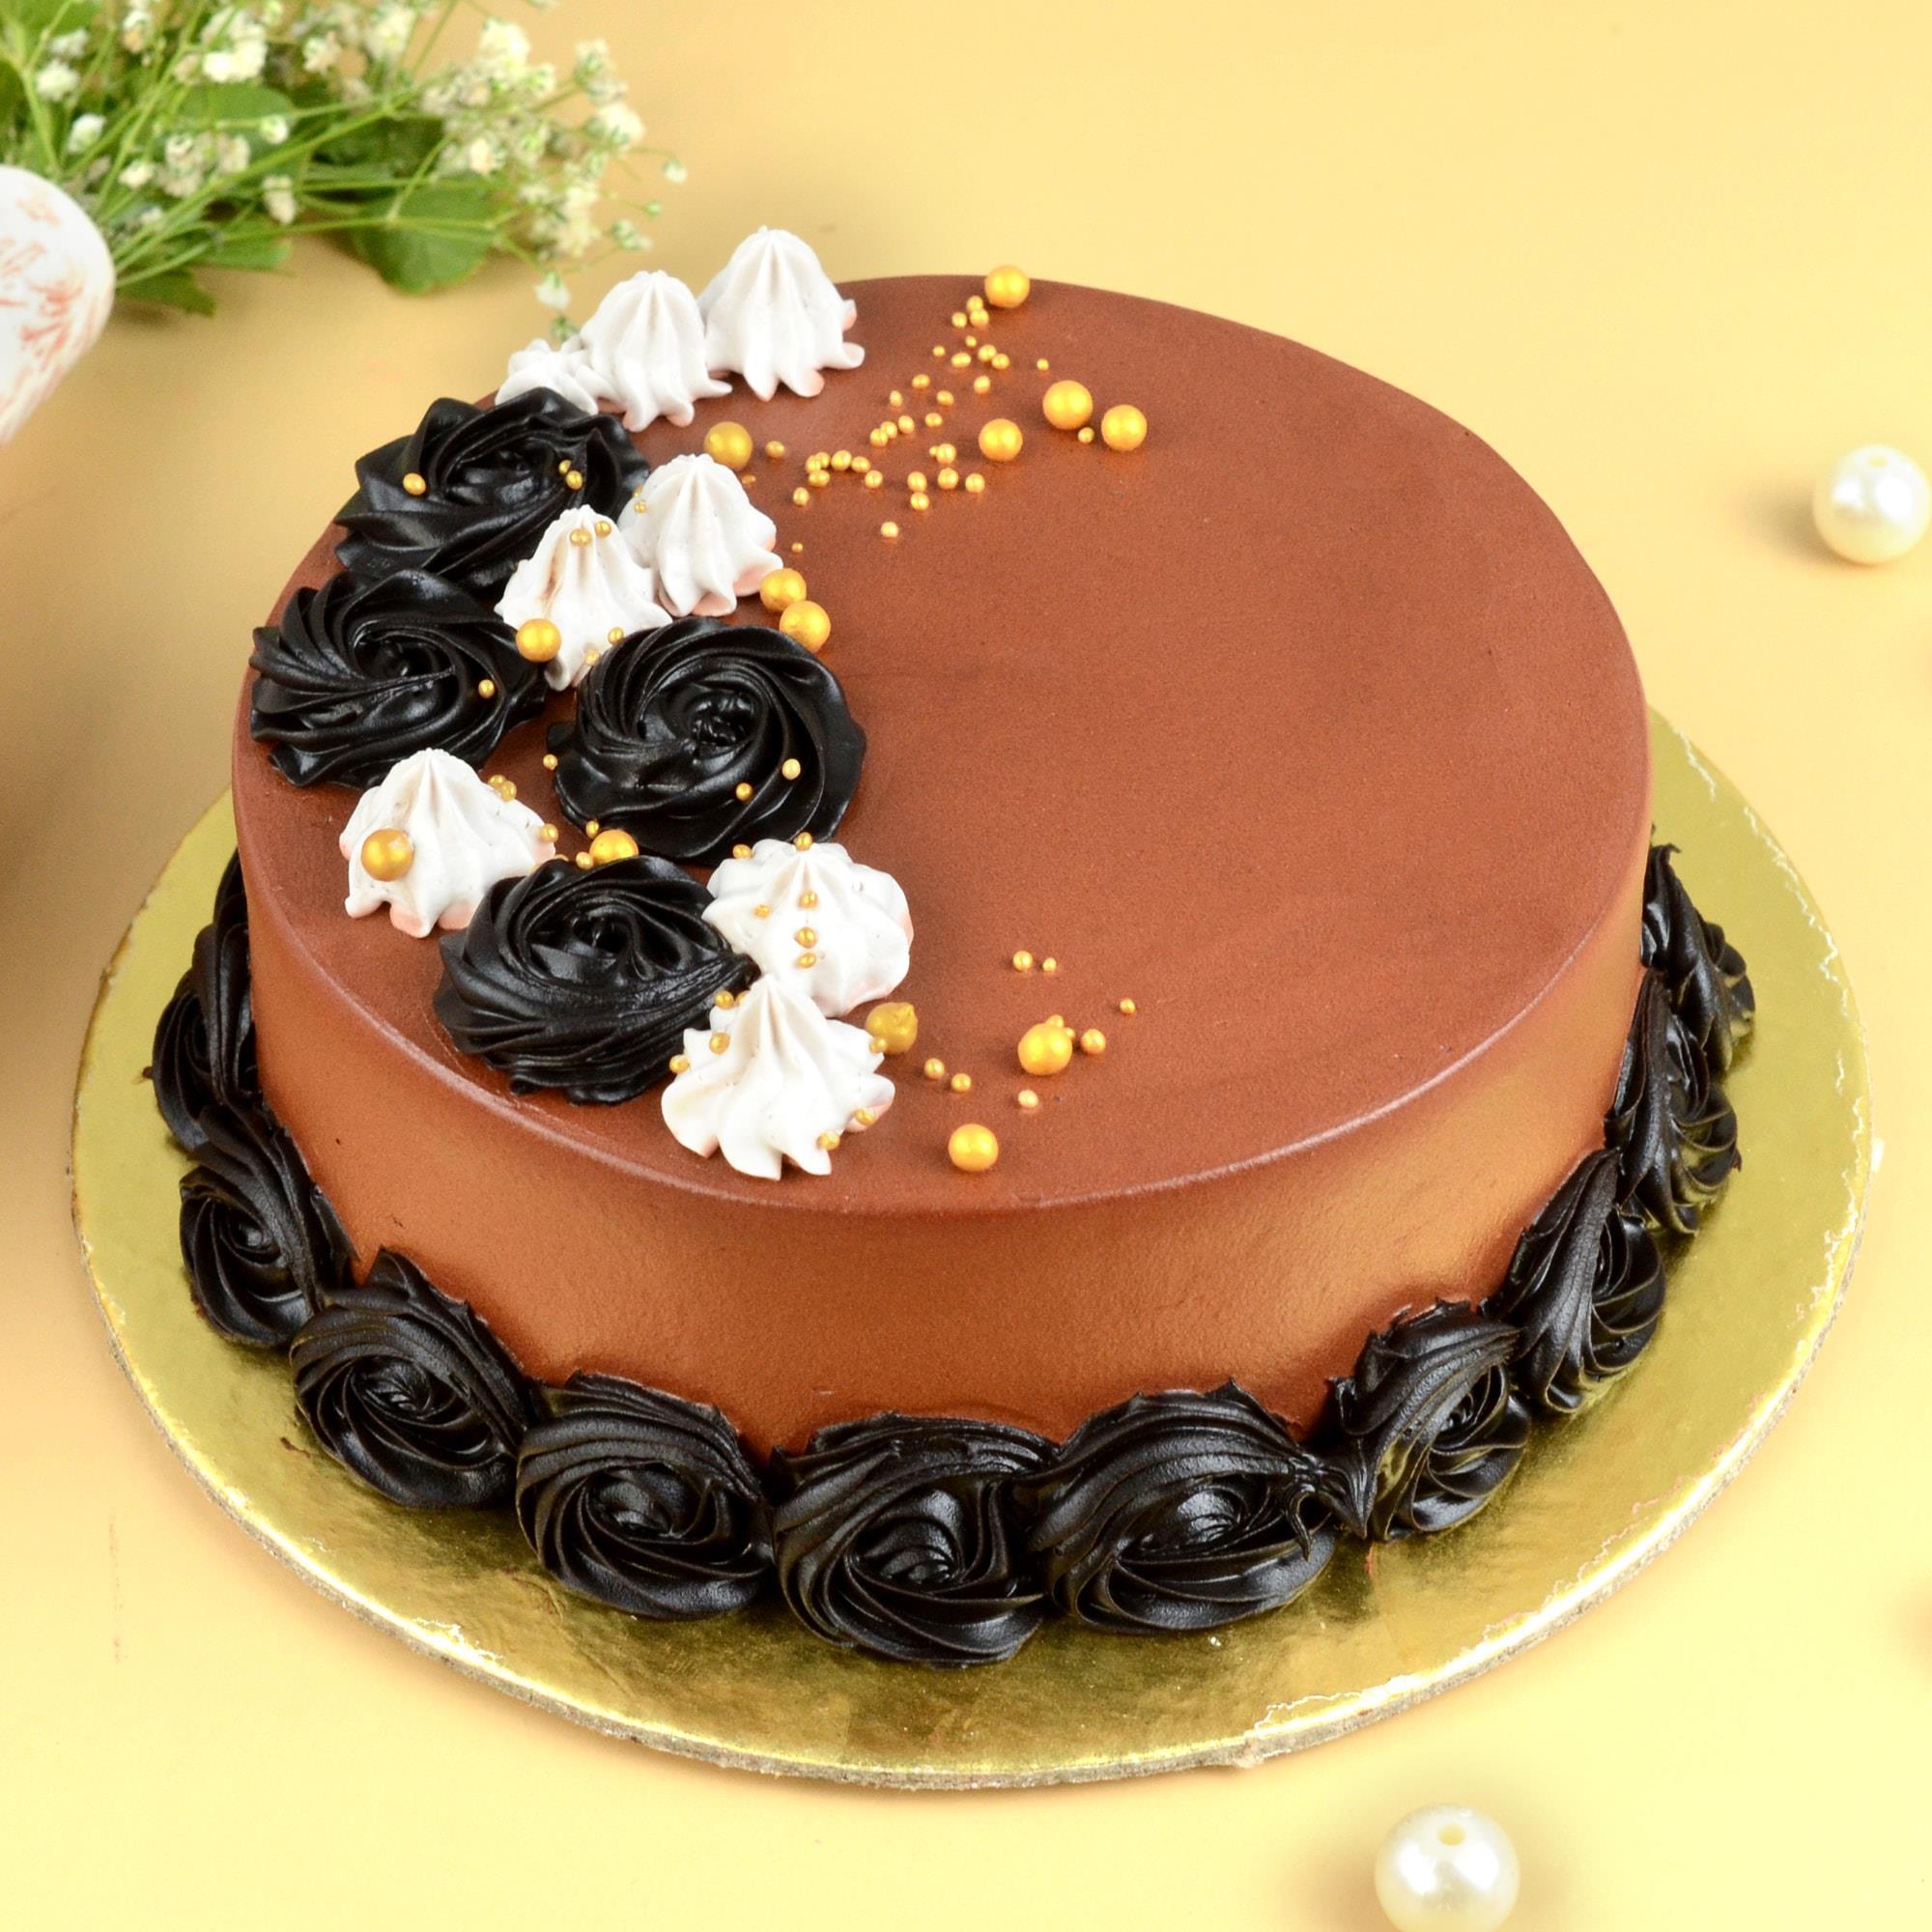 Chocolate Cake for Two - Style Sweet